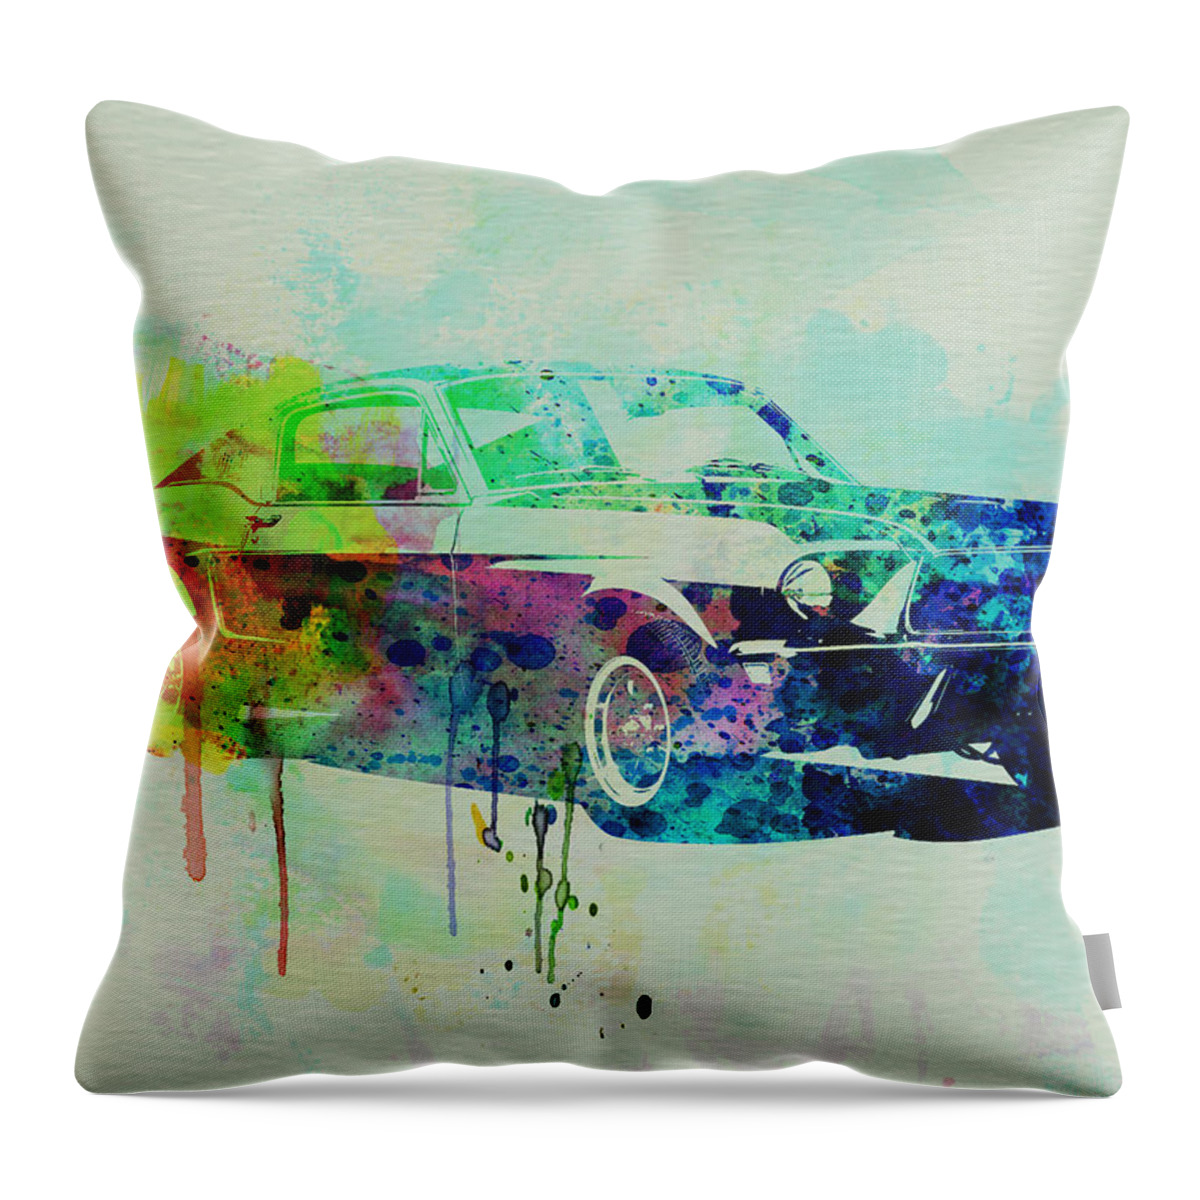 Ford Mustang Throw Pillow featuring the painting Ford Mustang Watercolor 2 by Naxart Studio